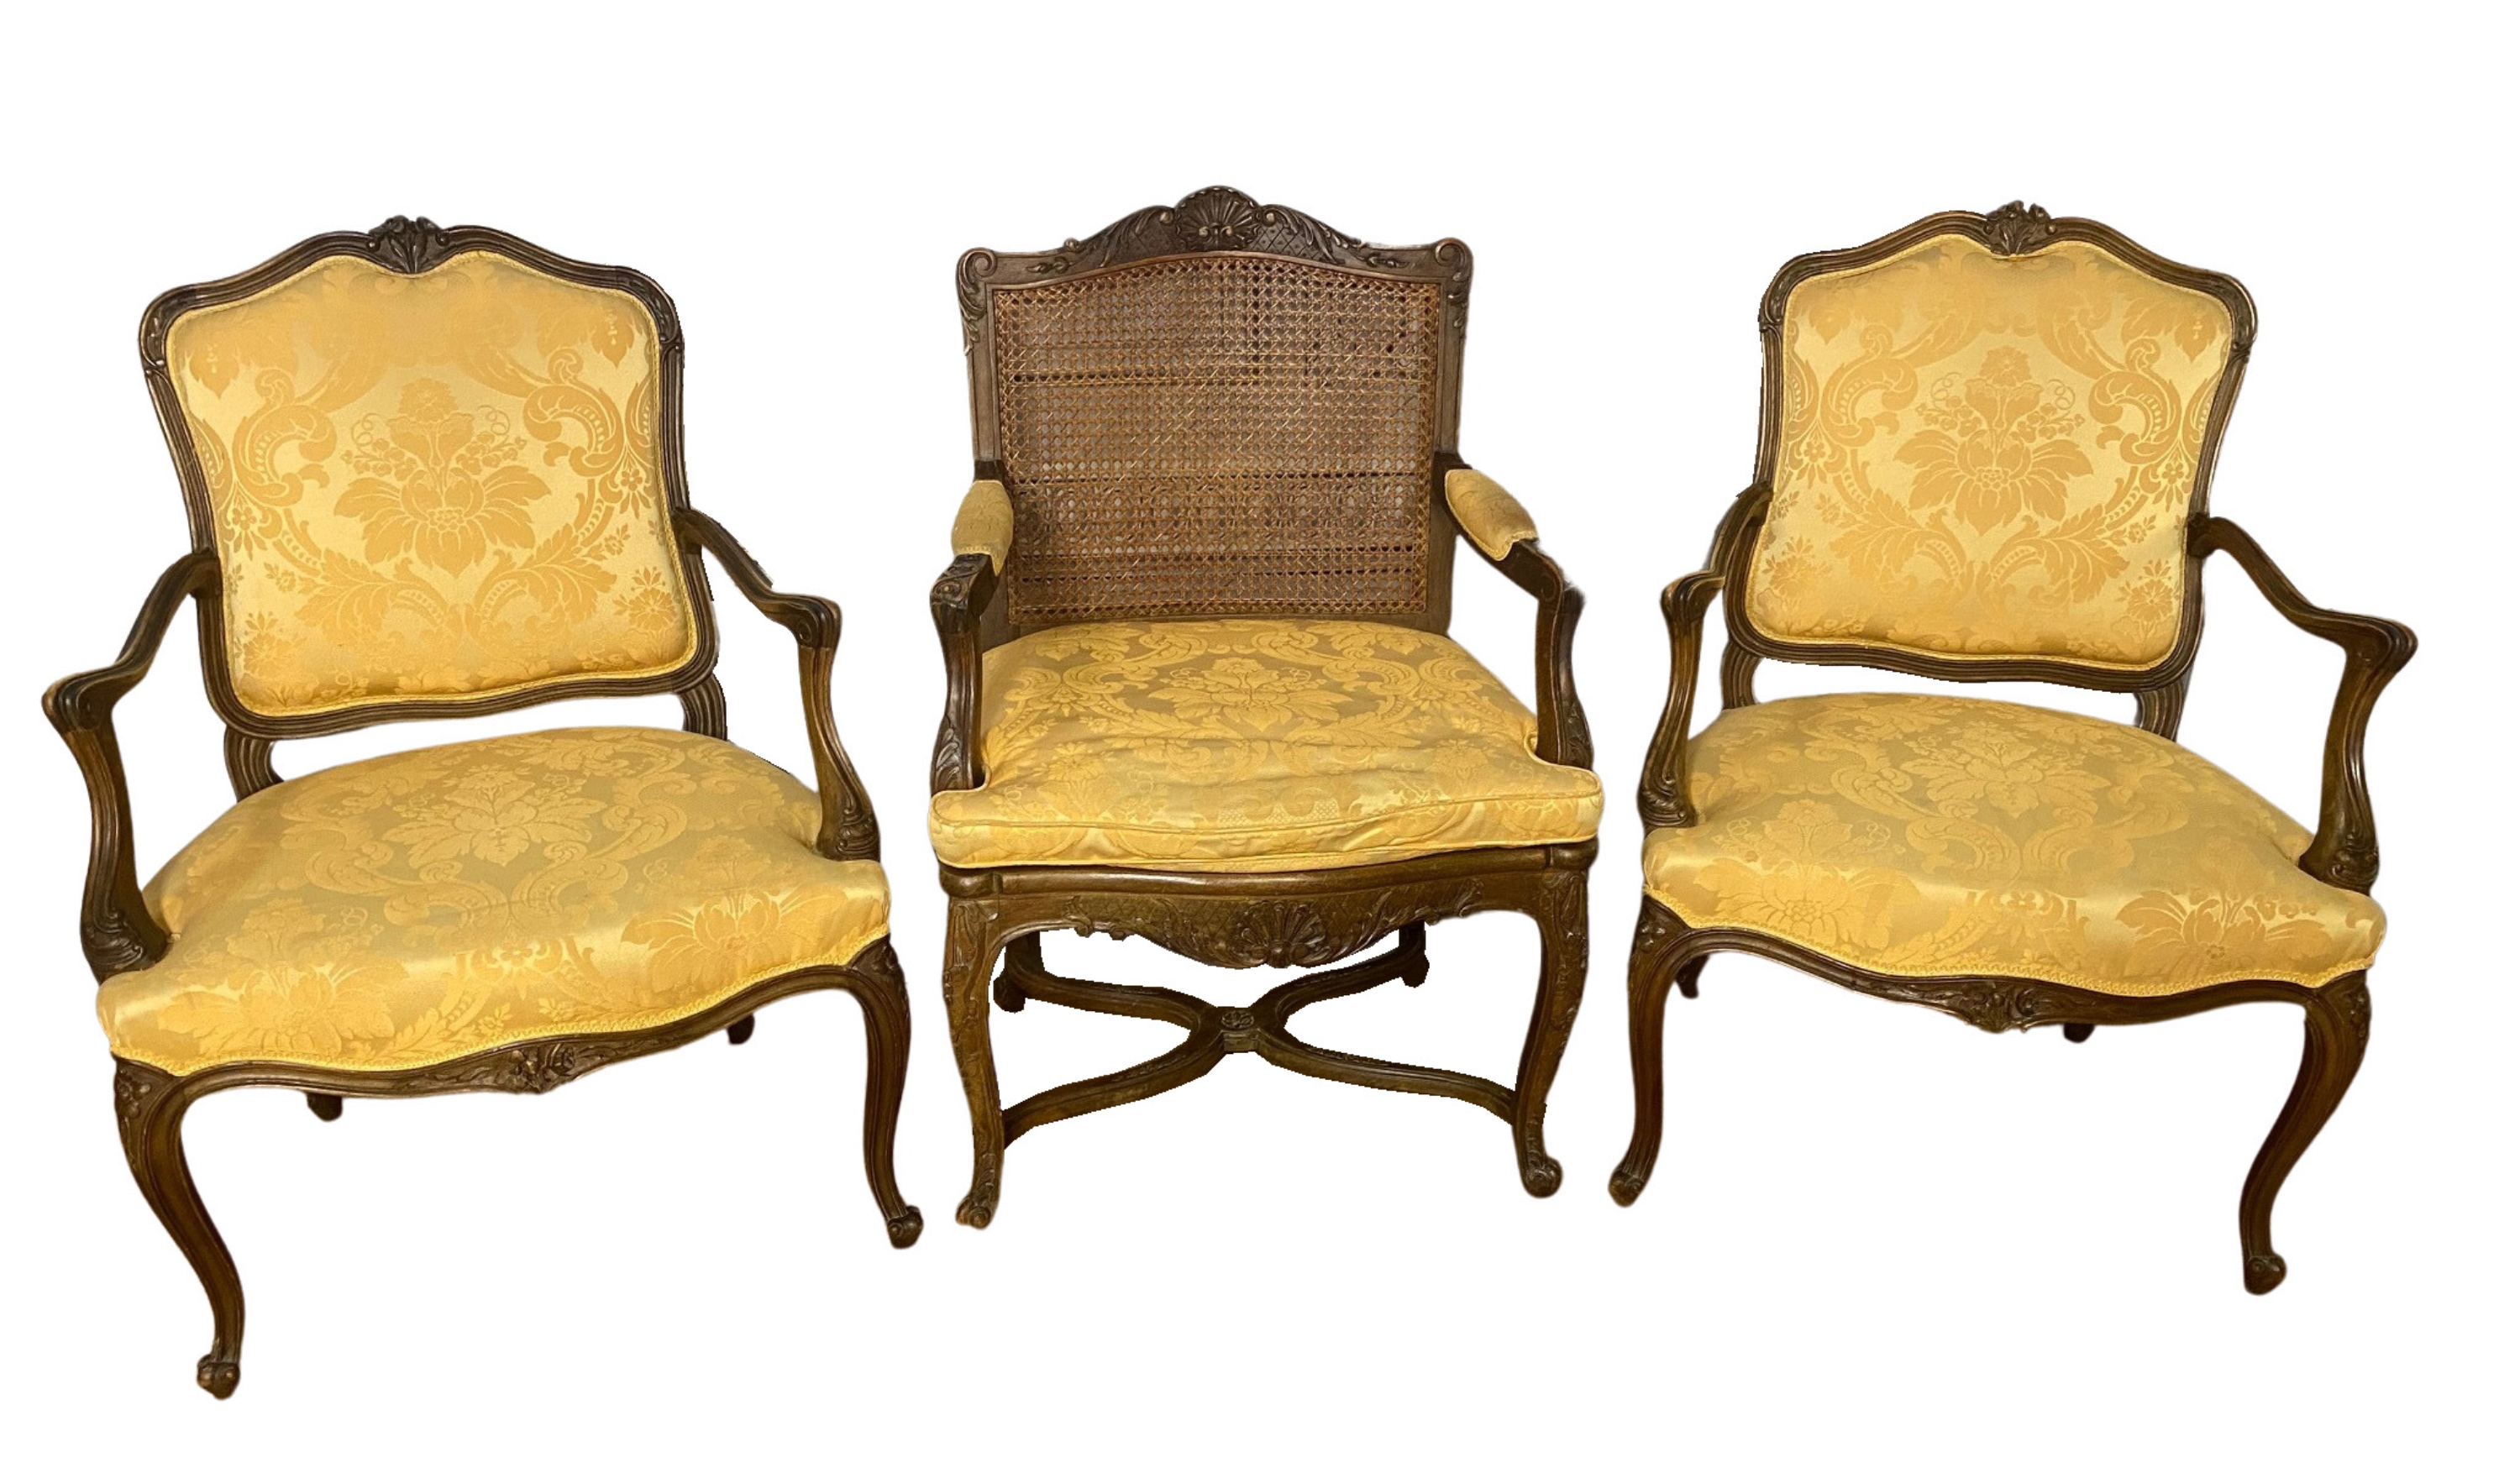 3 MISC LOUIS XV STYLE CARVED CHAIRS 2f8bee